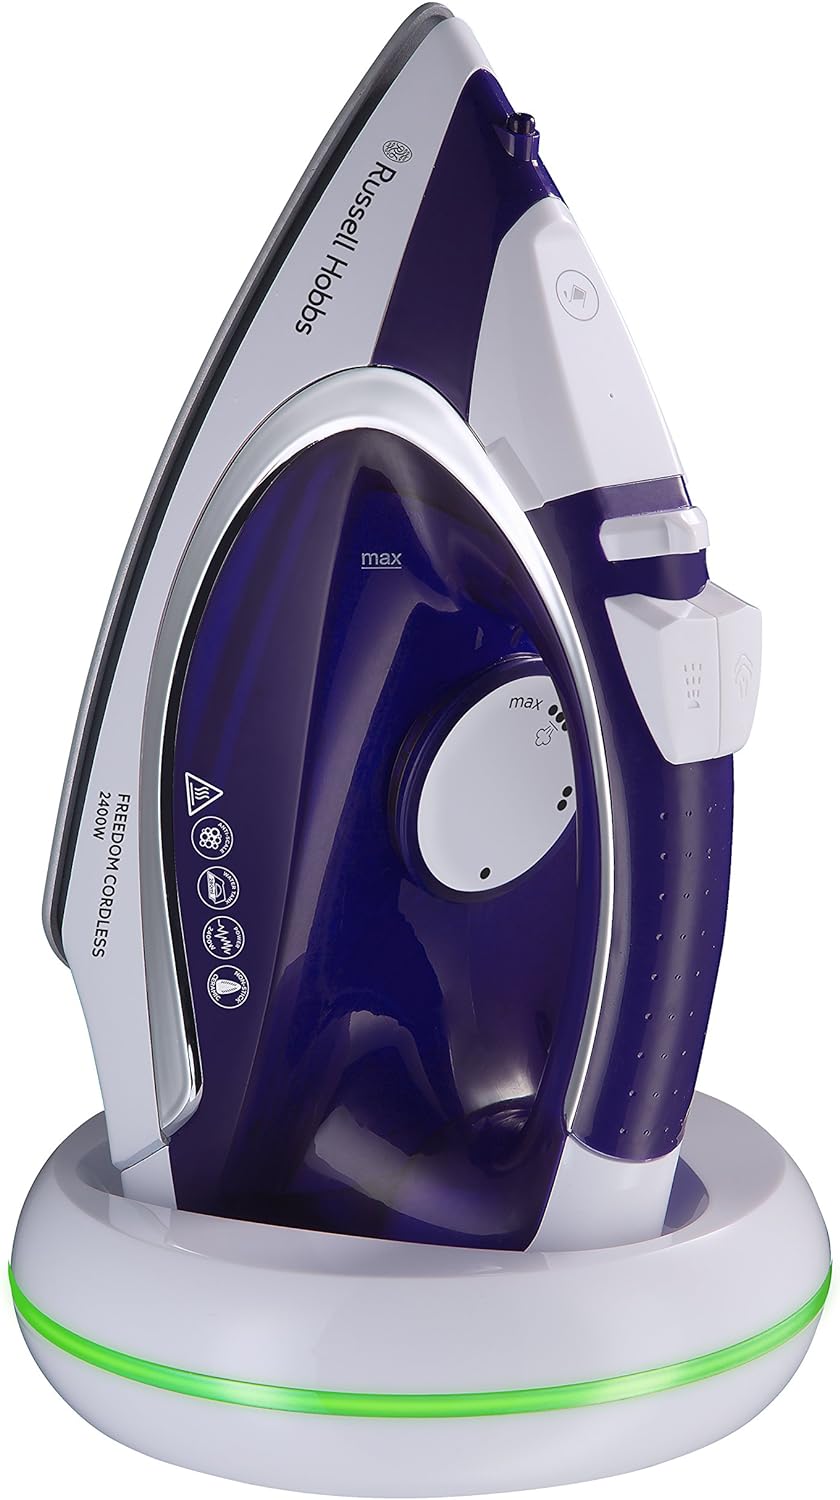 Russell Hobbs Freedom Cordless Steam Iron, Fast 5 seconds re-charge, Steam ready 30 seconds, Ceramic Non-stick soleplate, 135g Steam Shot, 40g Continuous steam, 300ml Water Tank, 2400W, 23300